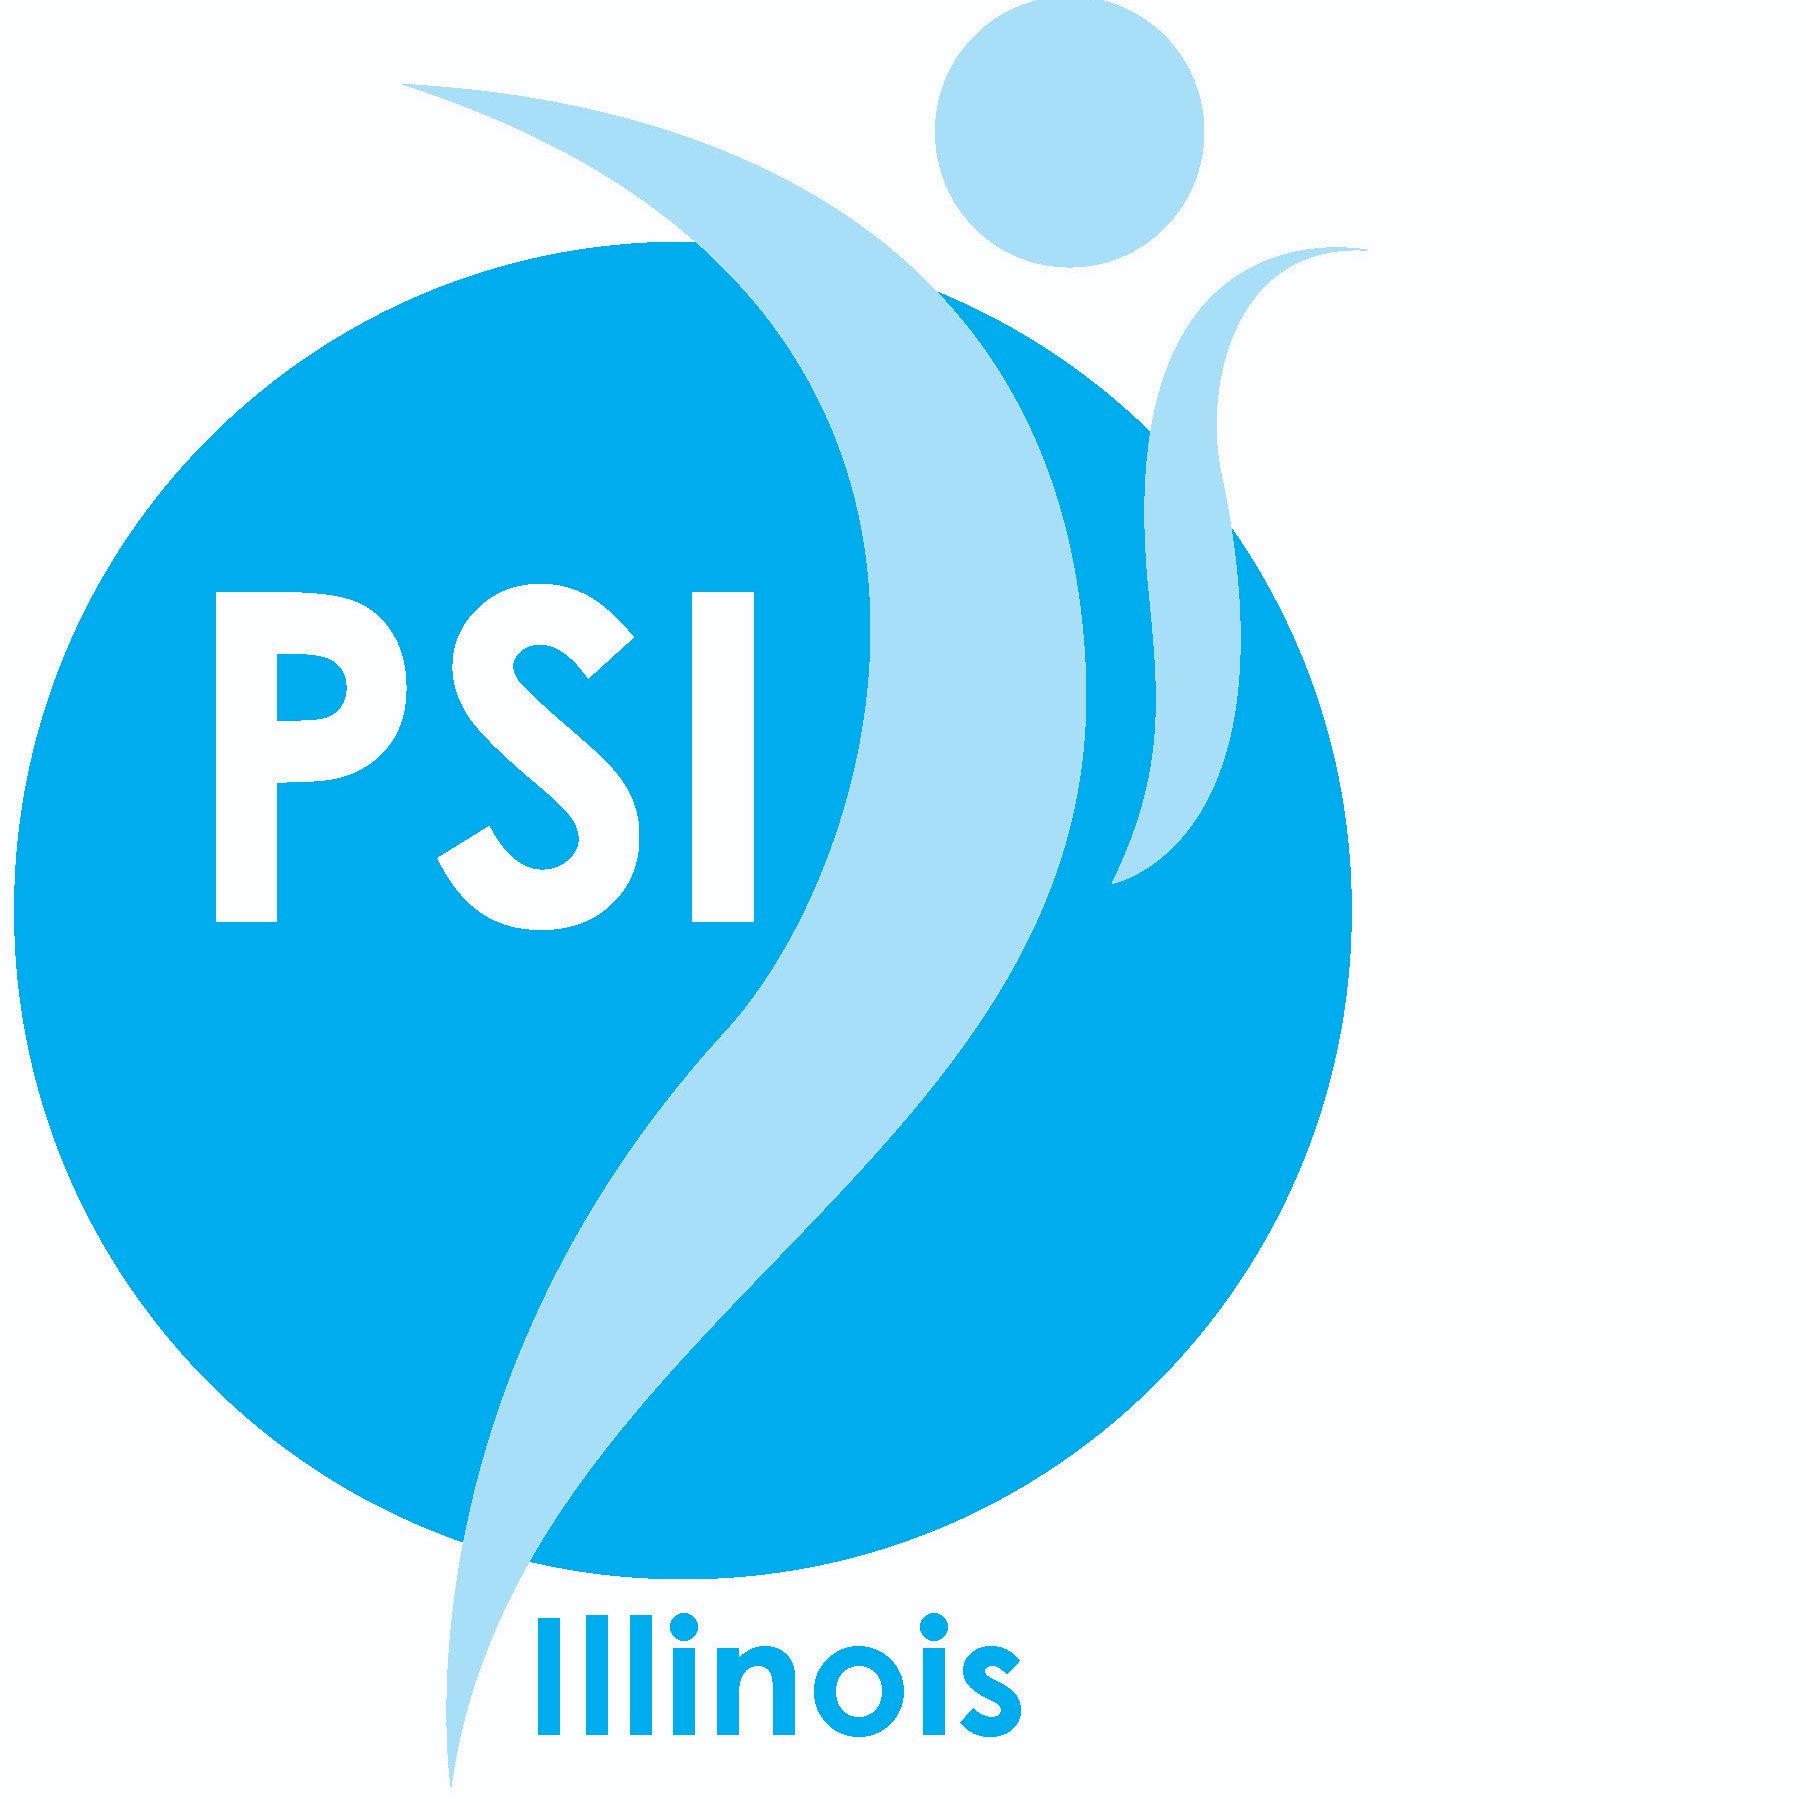 Our mission is to promote education, prevention, and treatment of mental health issues related to childbearing in Illinois and with @PostpartumHelp worldwide.